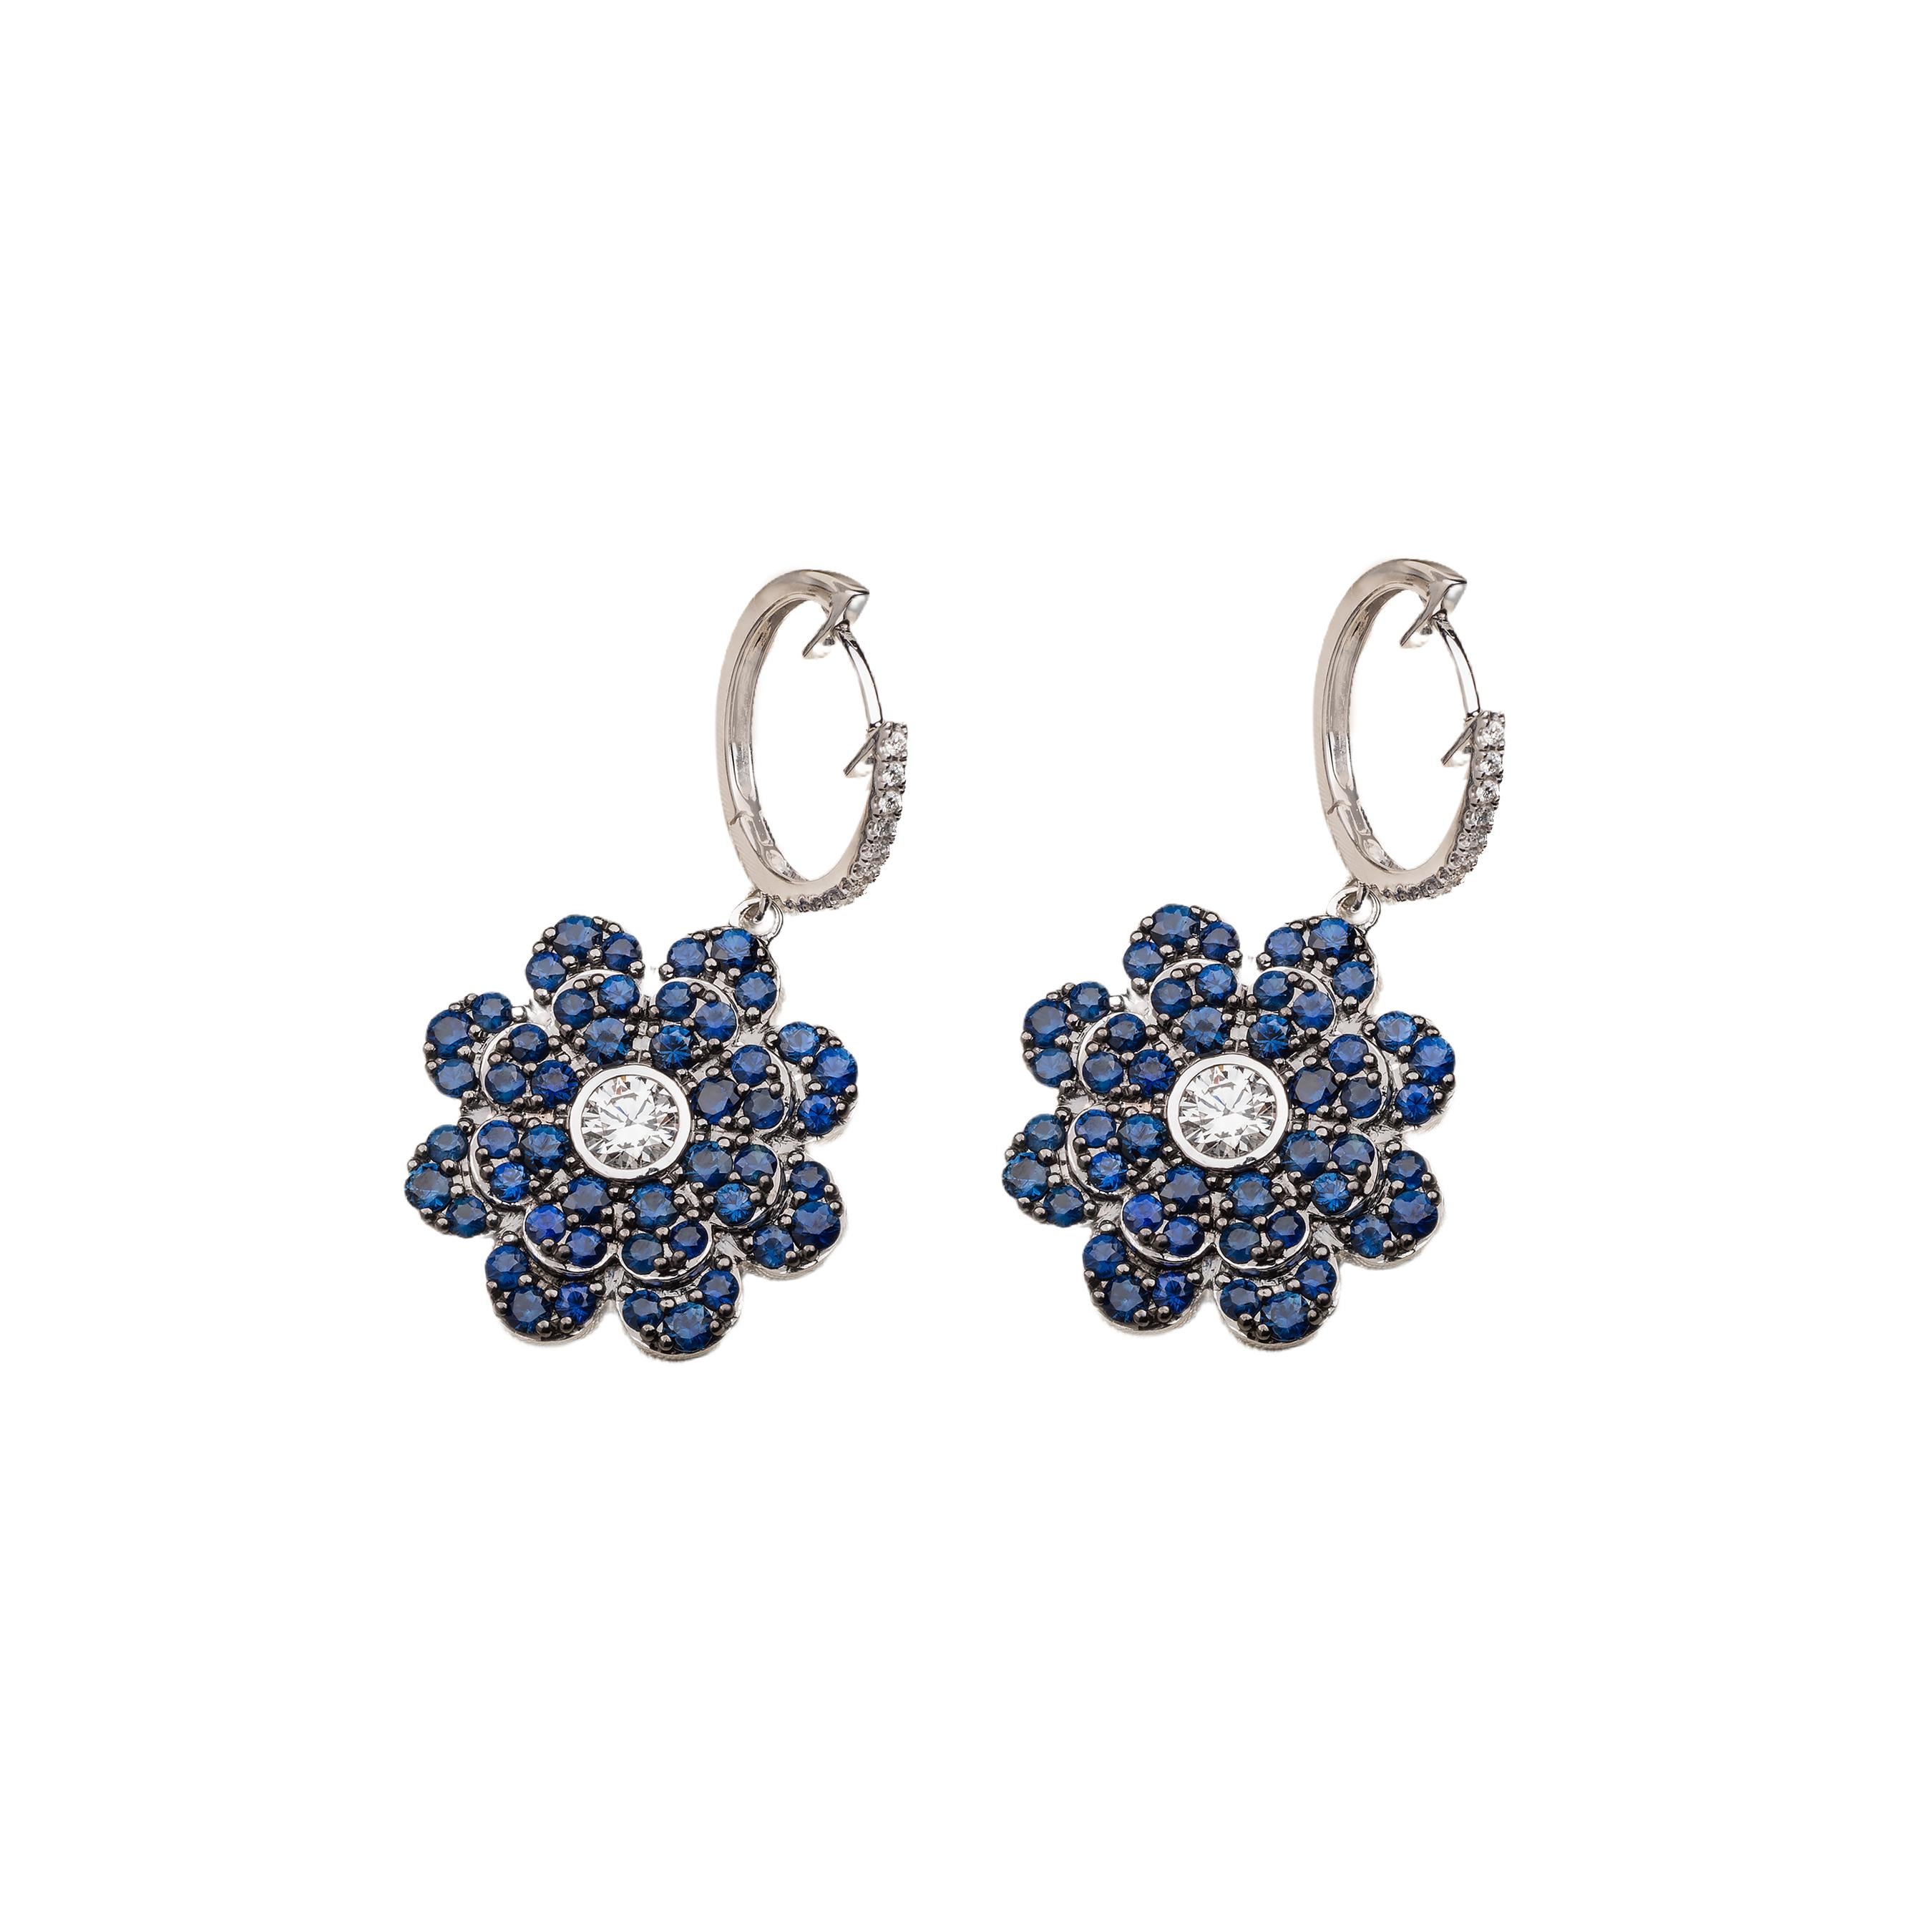 Memento Pave Blue Sapphire Flower with Diamond Center Dangle Earring LARGE In New Condition For Sale In Houston, TX